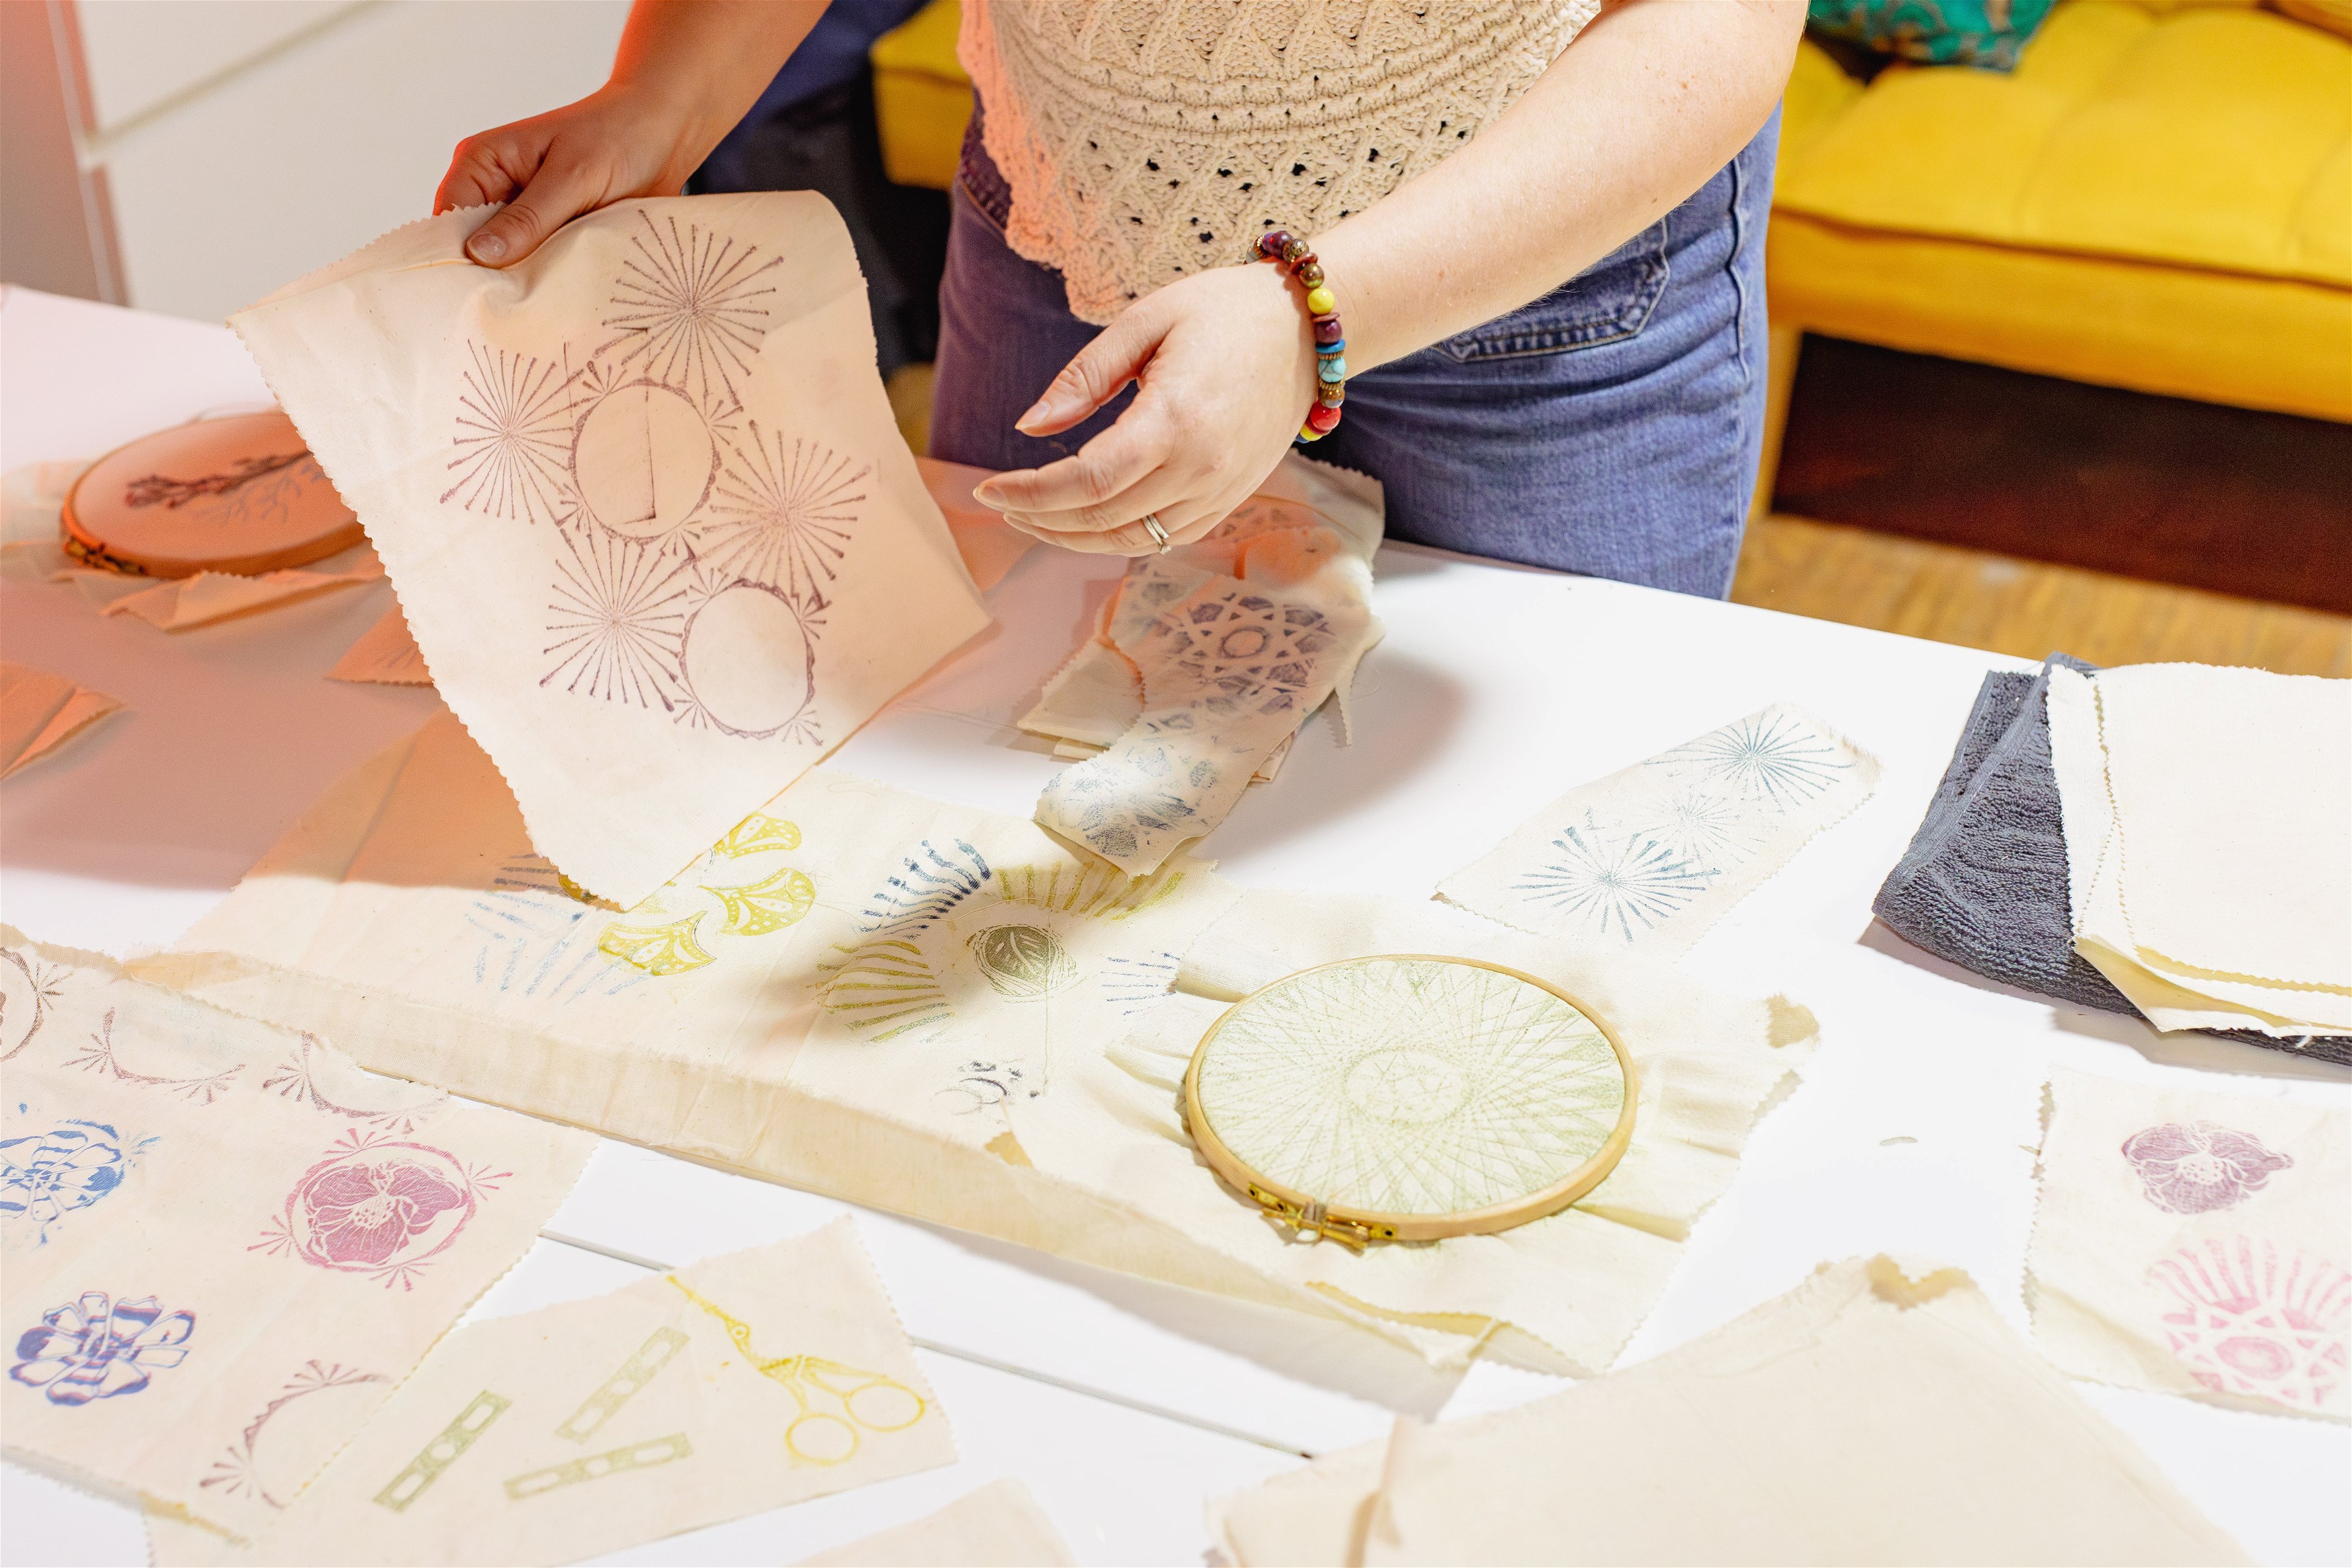 Stamp & Stitch - Print your own tote bag in this embroidery and print-making workshop